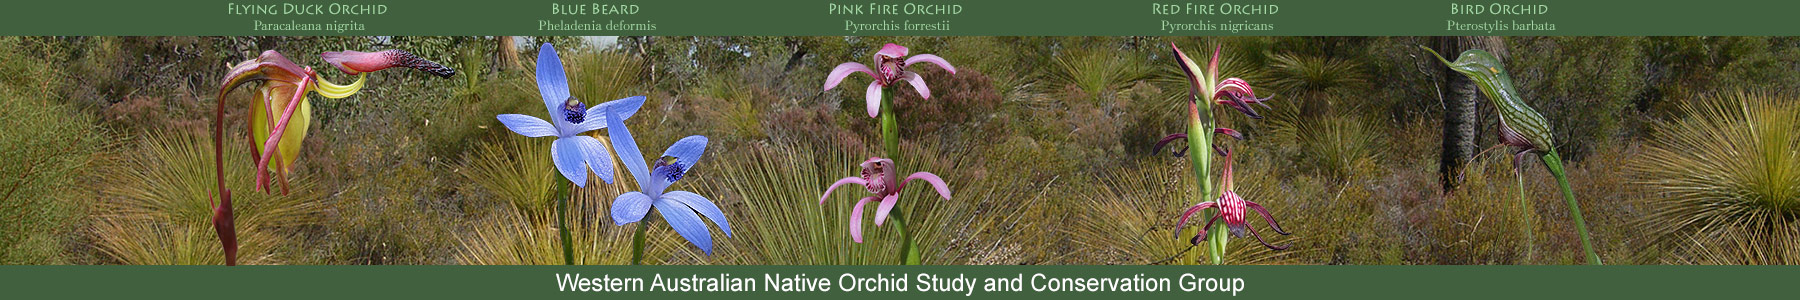 Western Australian Native Orchid Study and Conservation Group Inc.